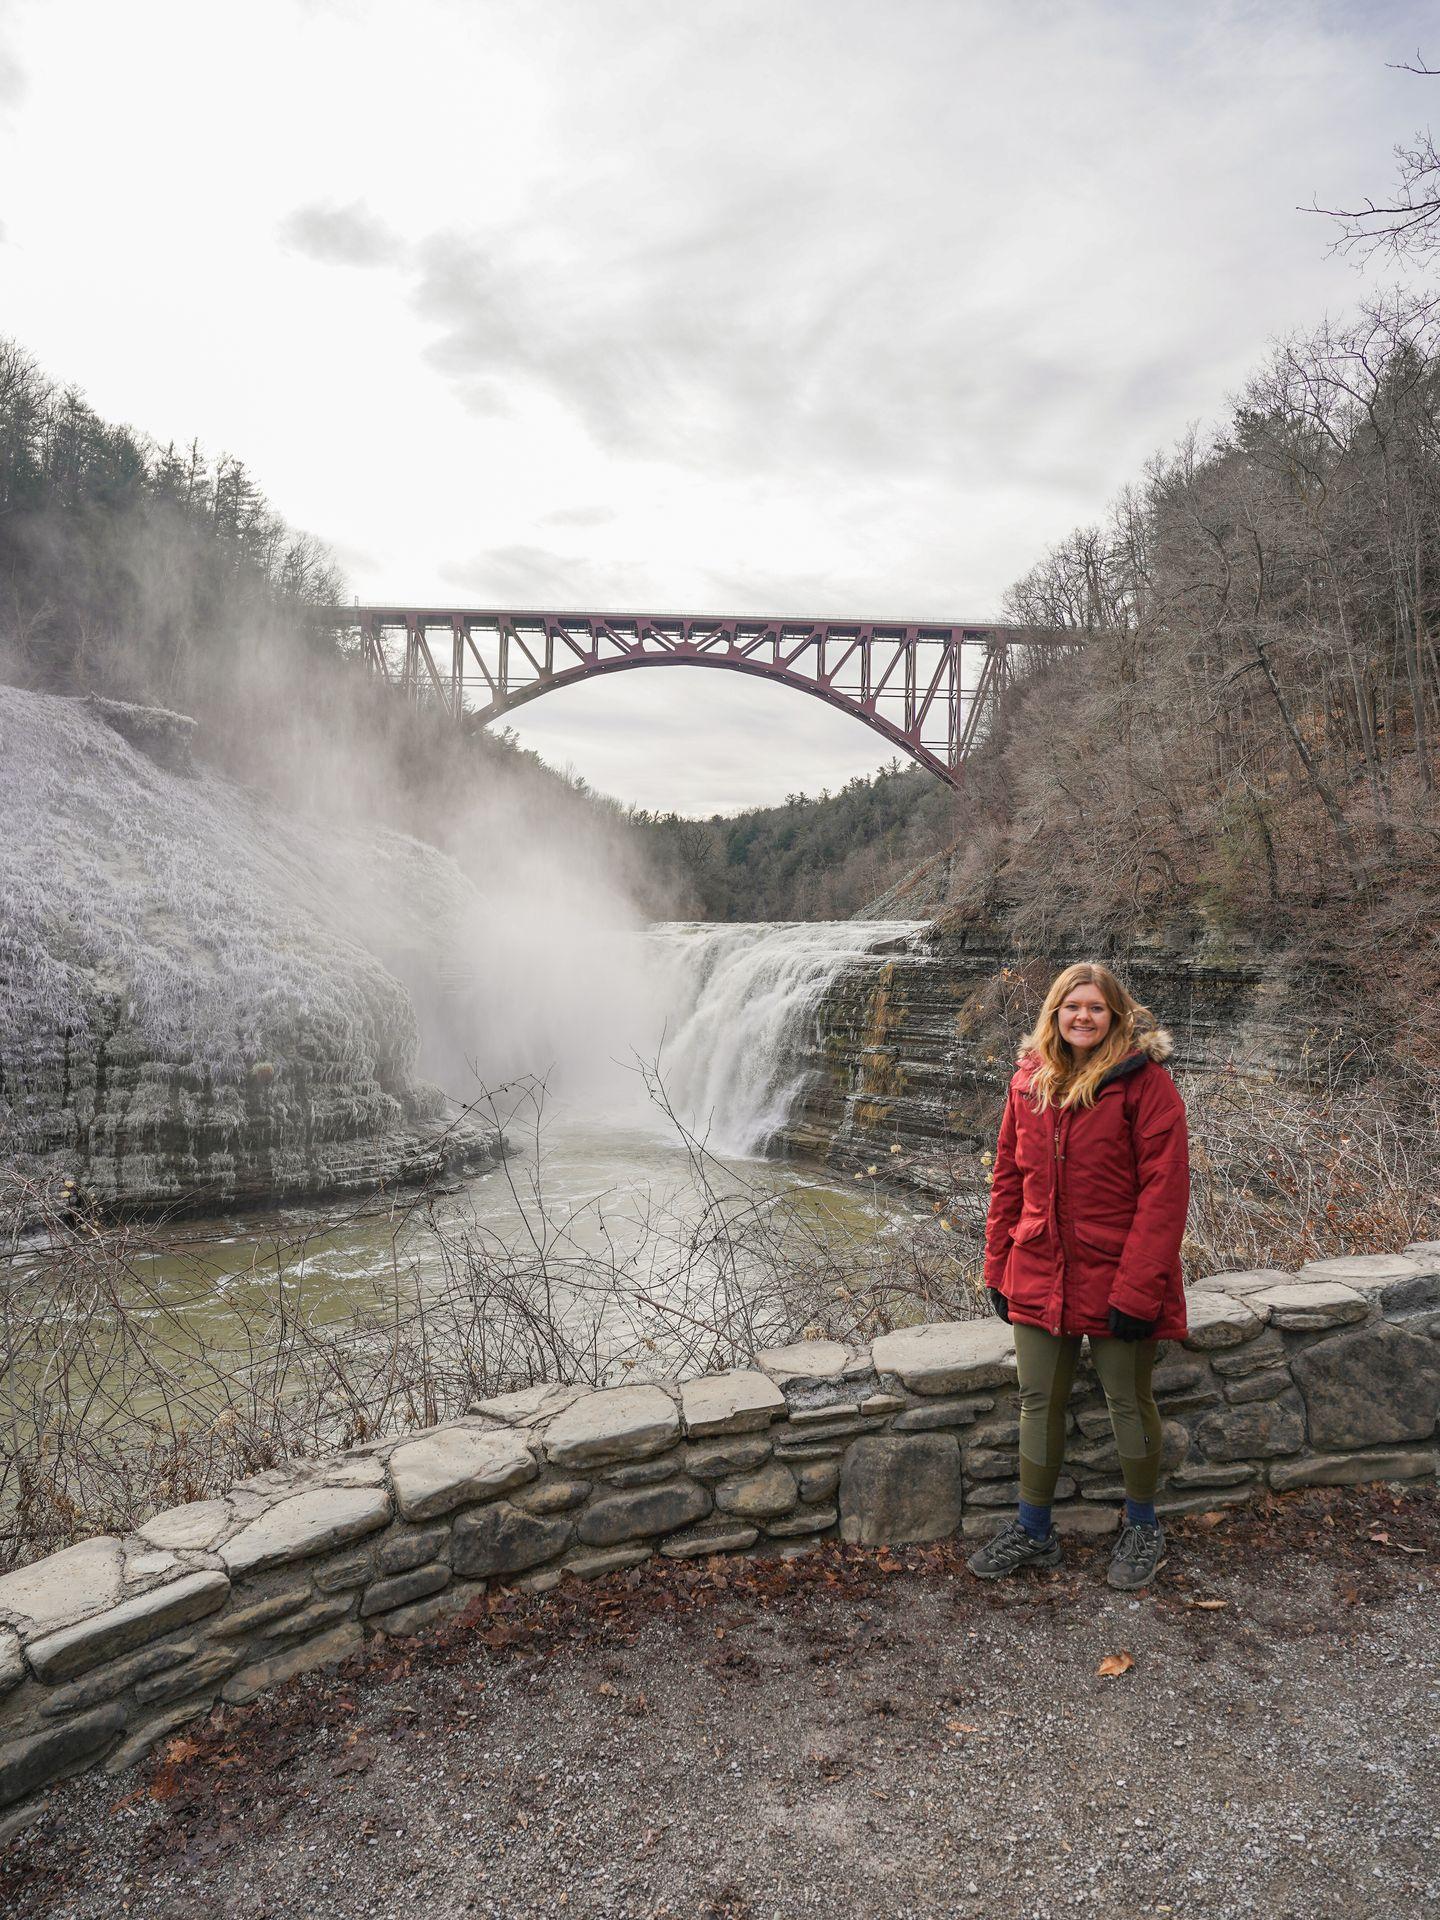 Lydia standing in front of a waterfall that has a bridge over it. There is a light dusting of snow and ice covering the rock face.